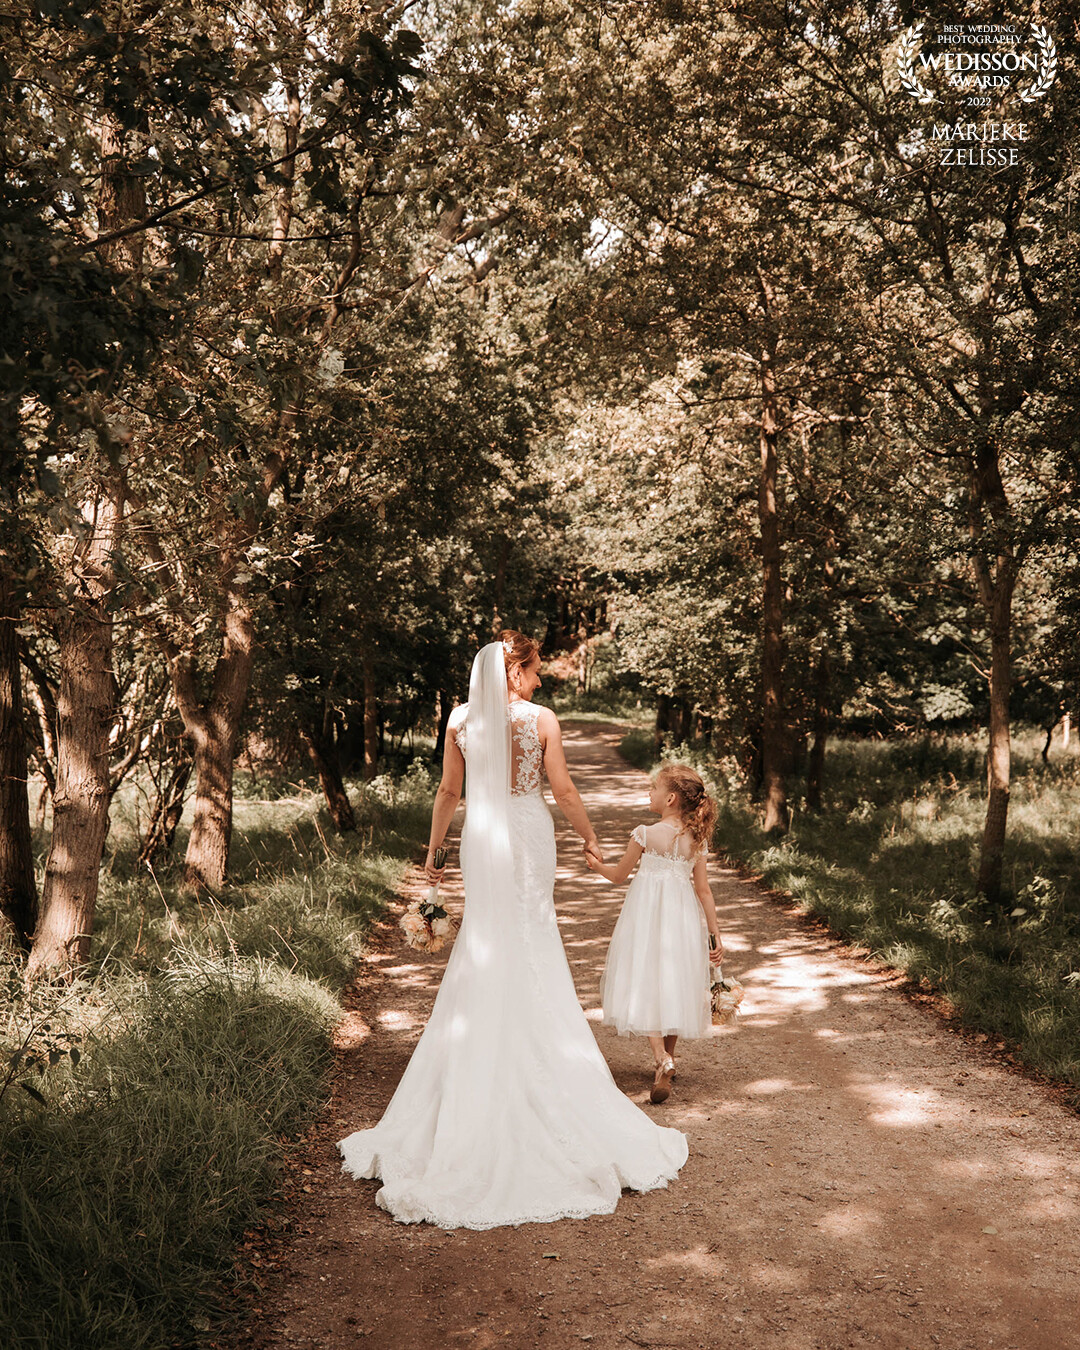 This beautiful bride with her daughter, her little bridesmaid! I love the play of the sun between the trees and the chemistry between mother & daughter.